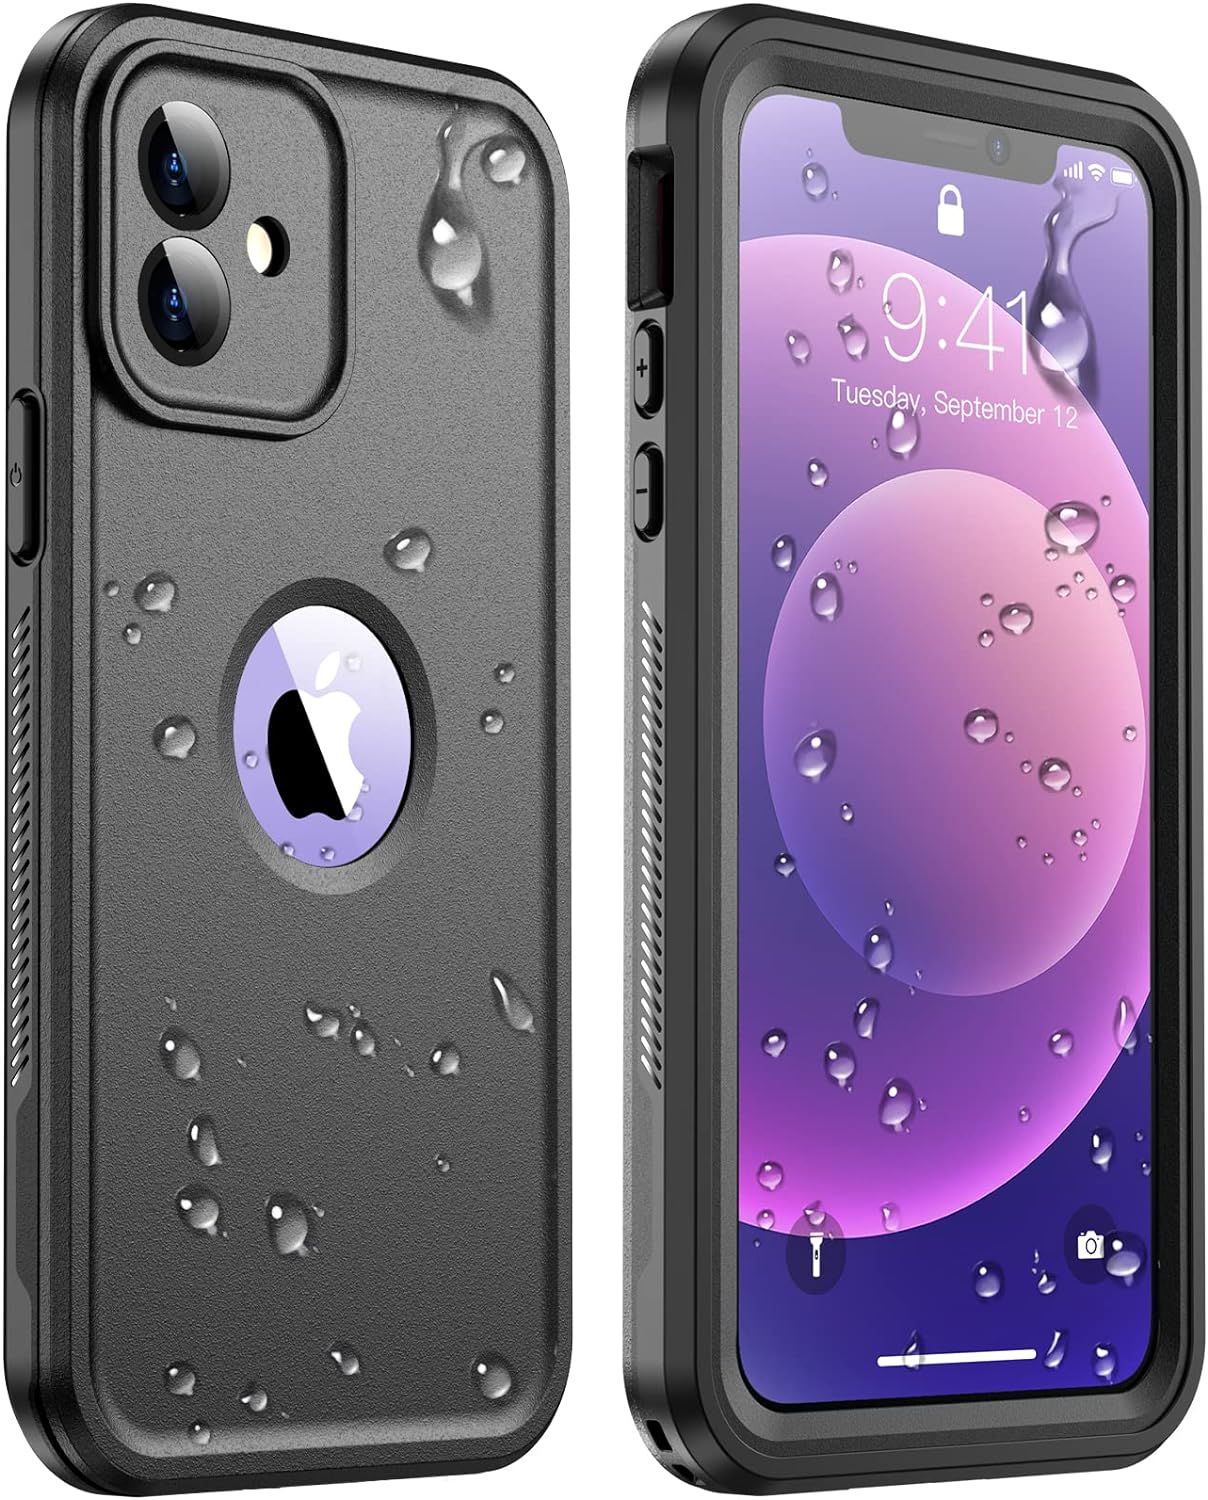 Temdan [Real 360 for iPhone 12 Case Waterproof, Built-in 9H Tempered Glass Camera Lens & Screen Protection [Military Dropproof][Full-Body Shockproof][Dustproof][IP68 Underwater]- Black